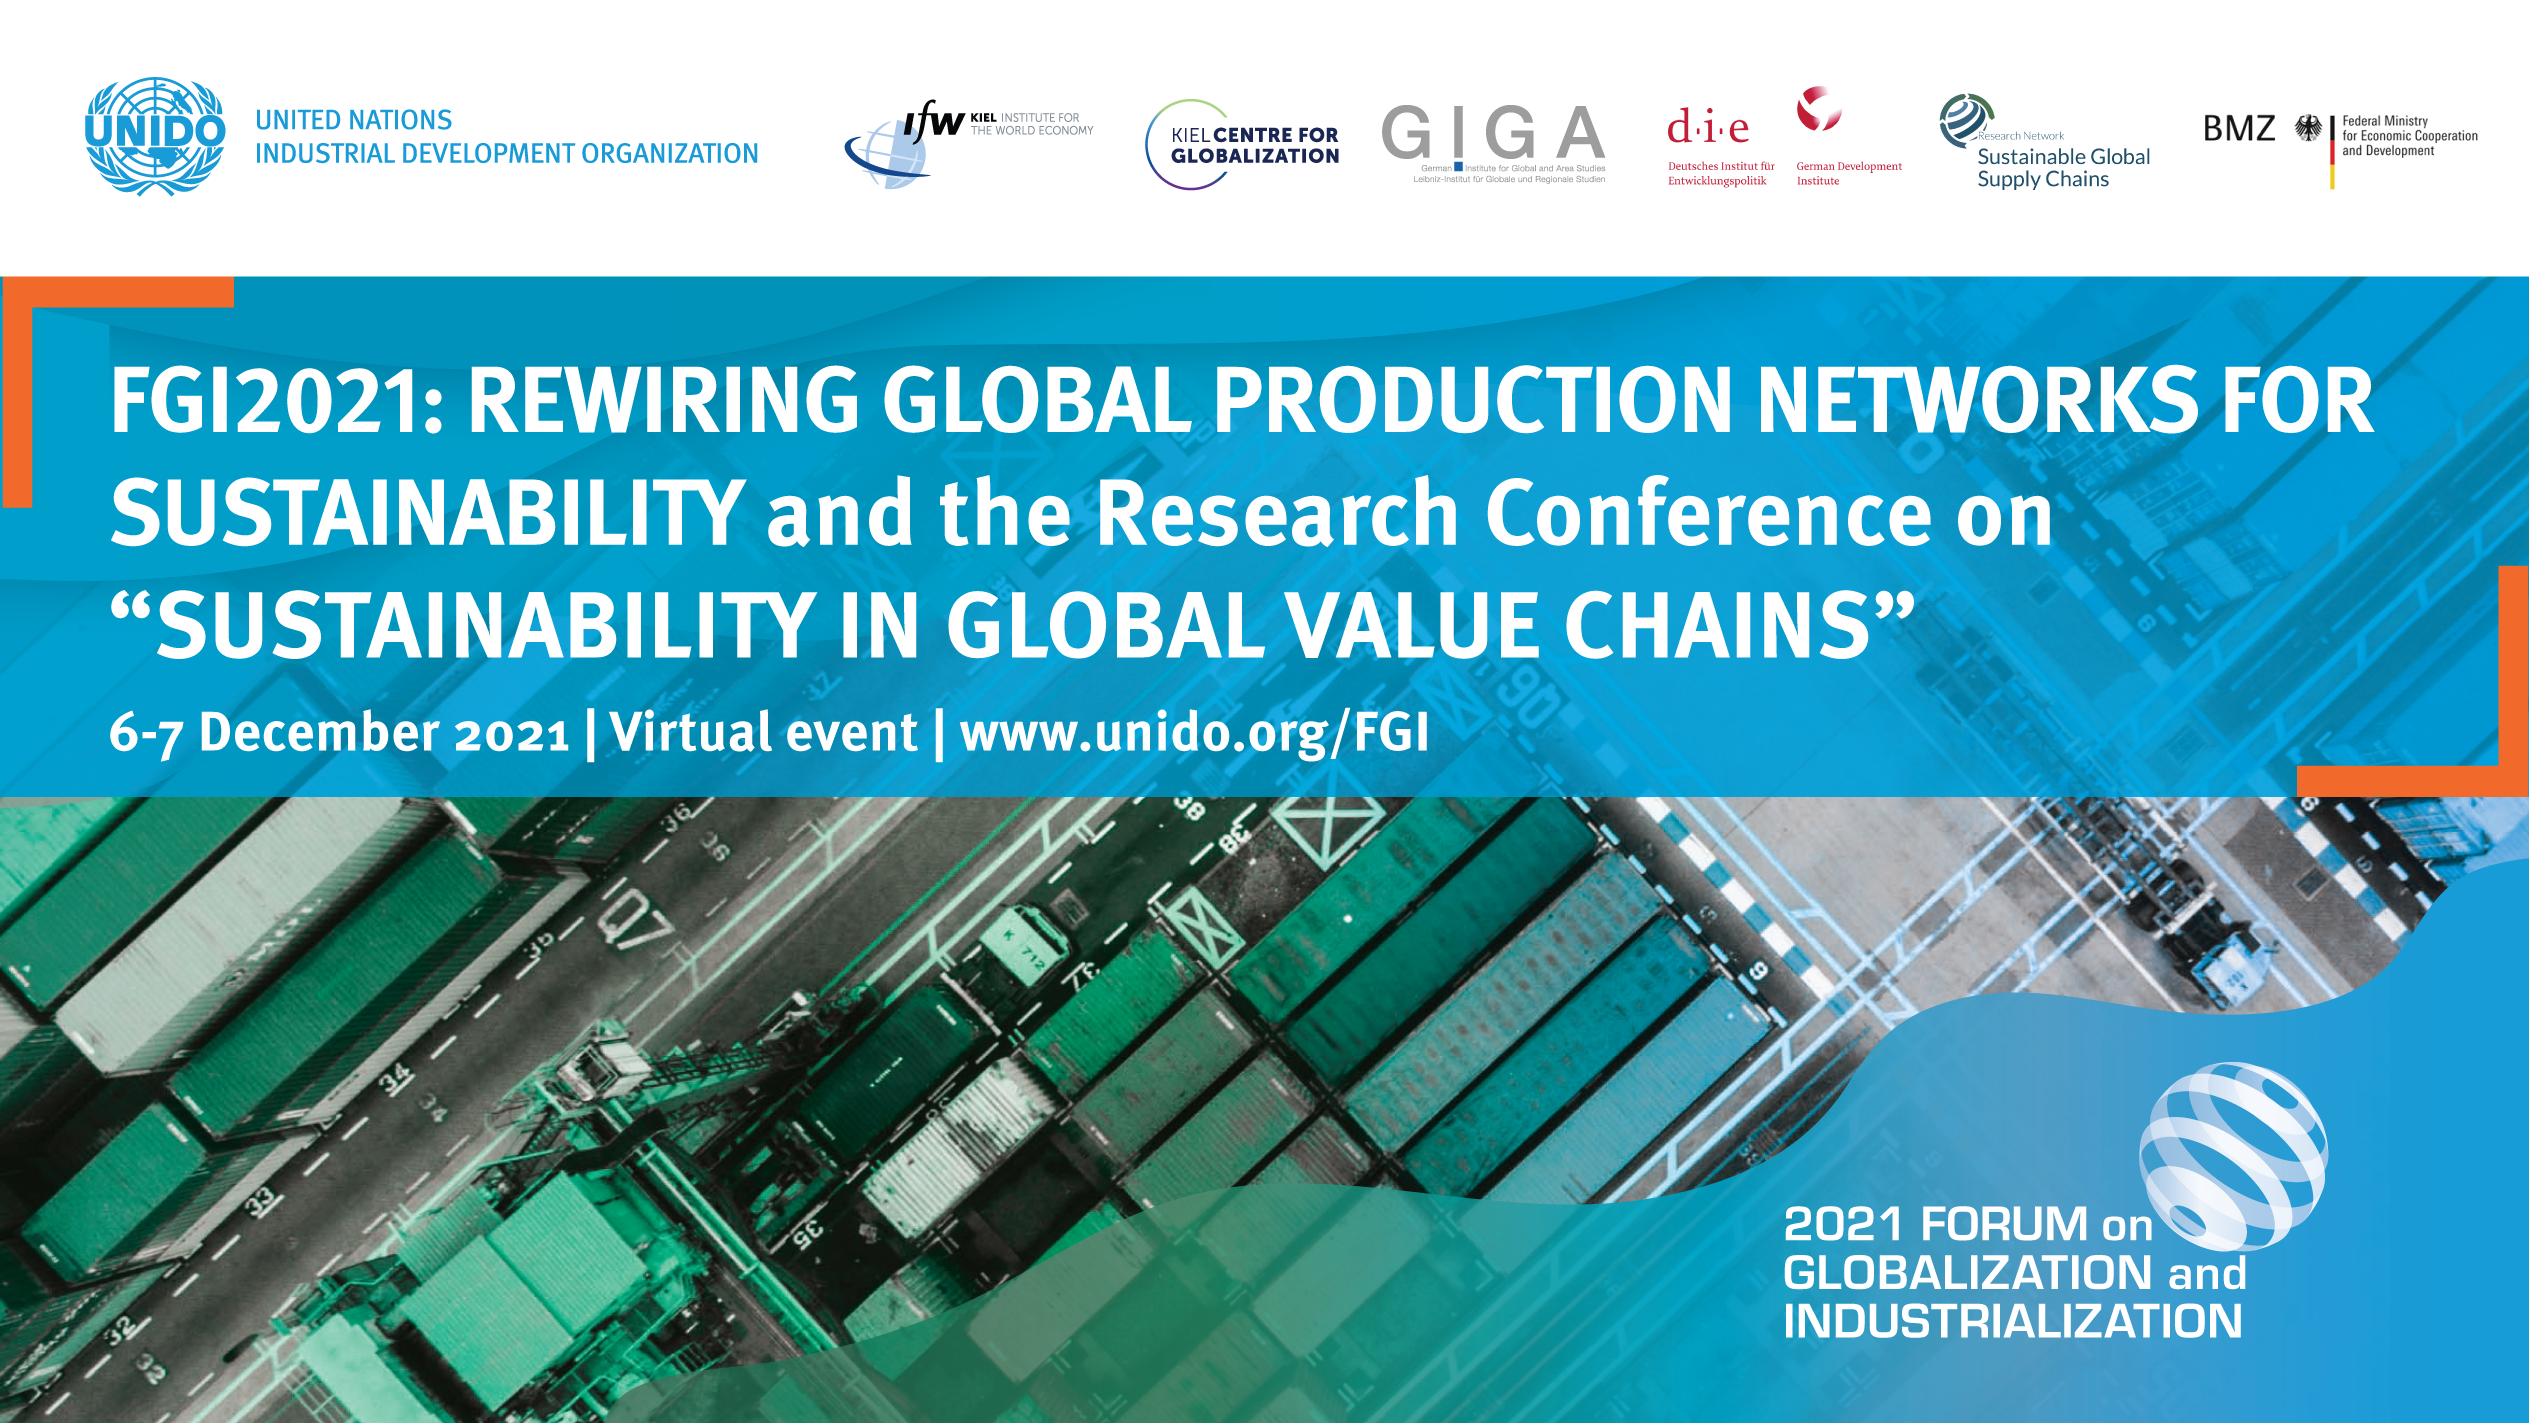 UNIDO-research-conference-sustainability-gvcs-banner